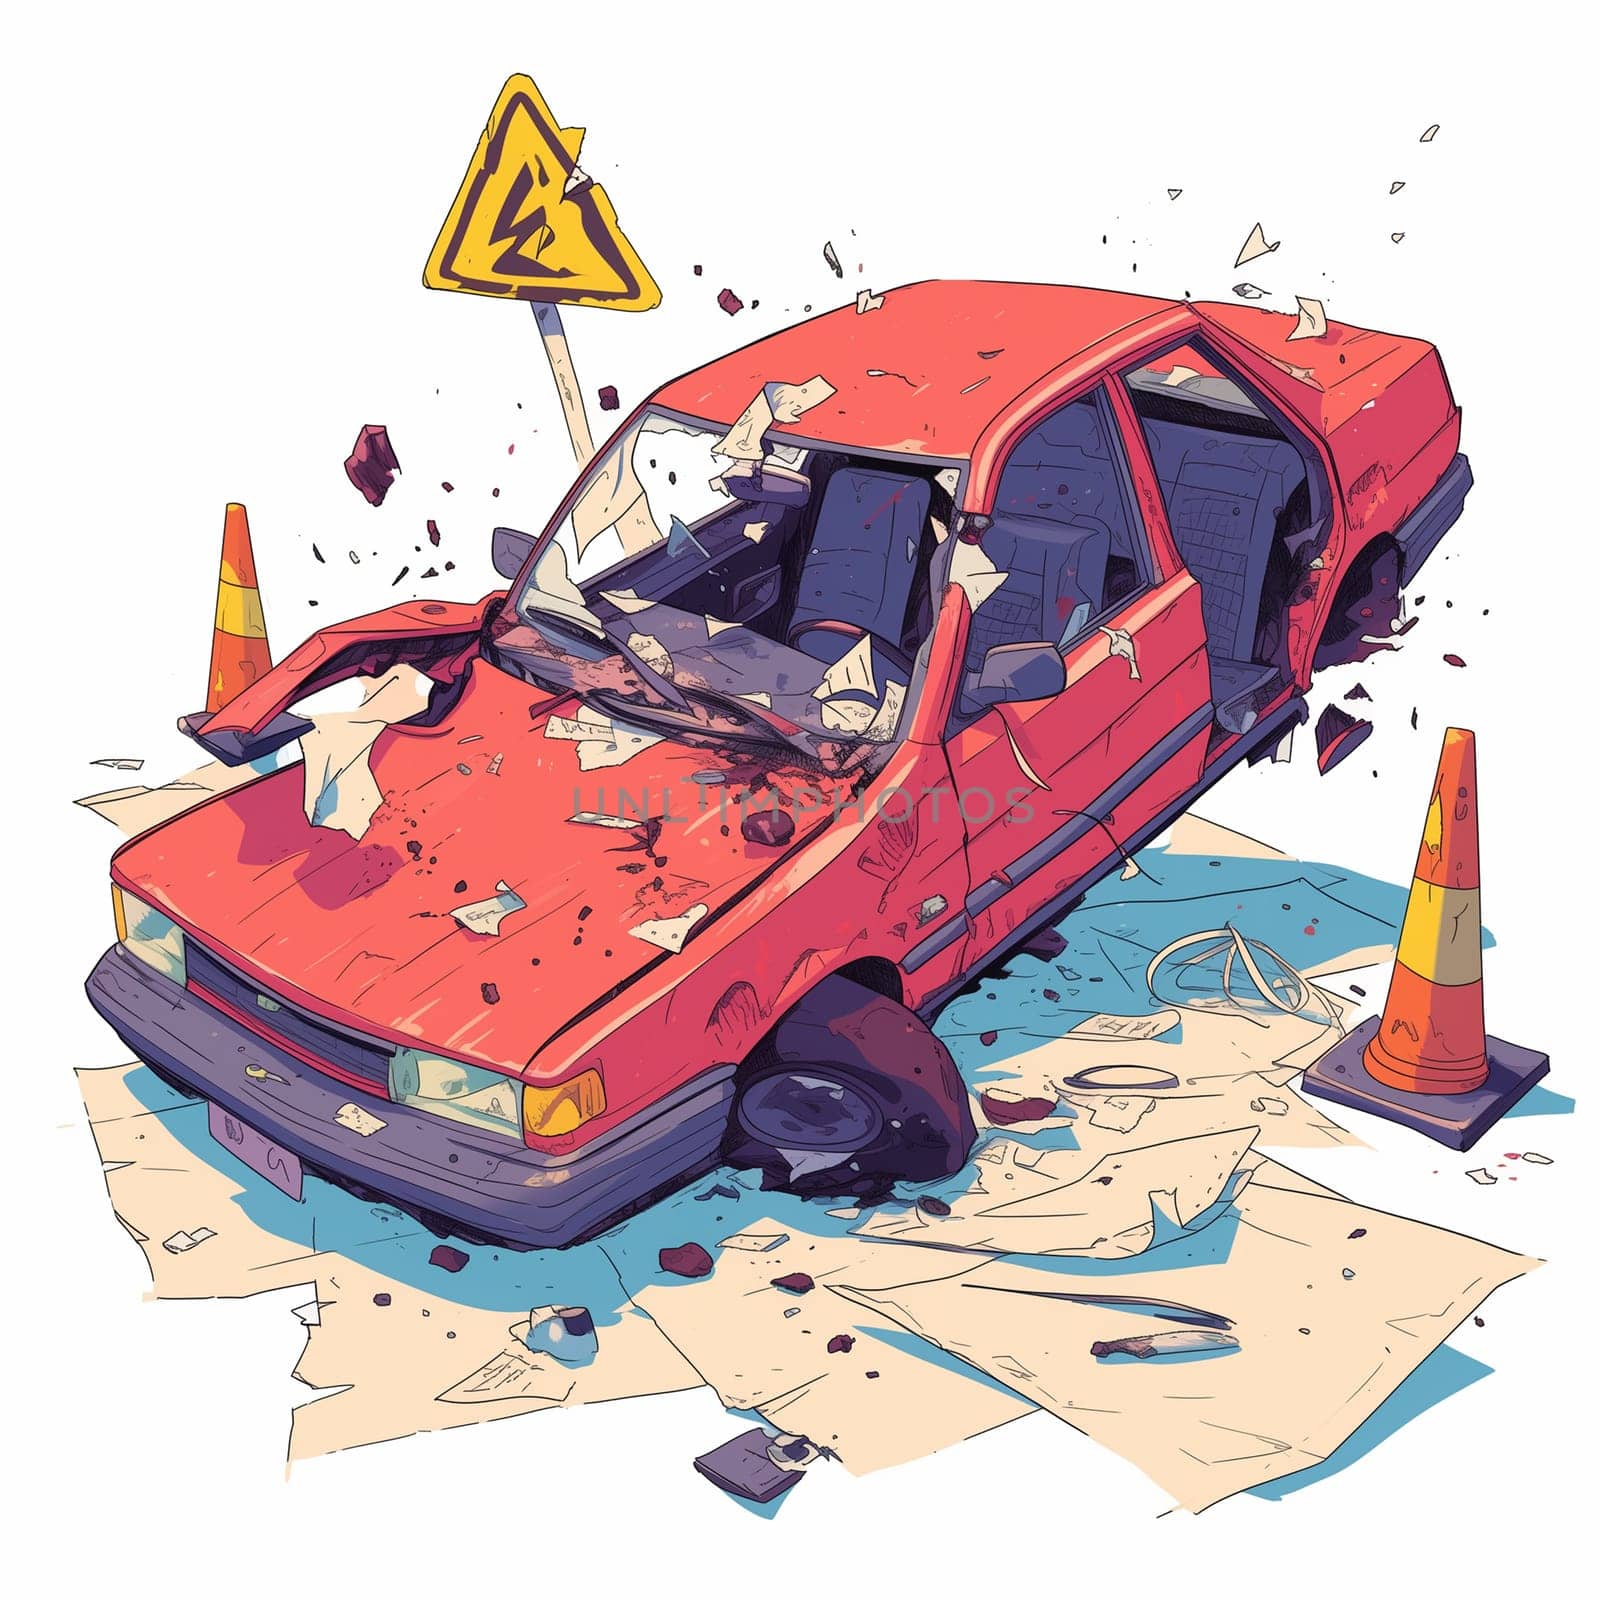 An illustration of a bright red car parked with a safety cone placed in front of it on a road.